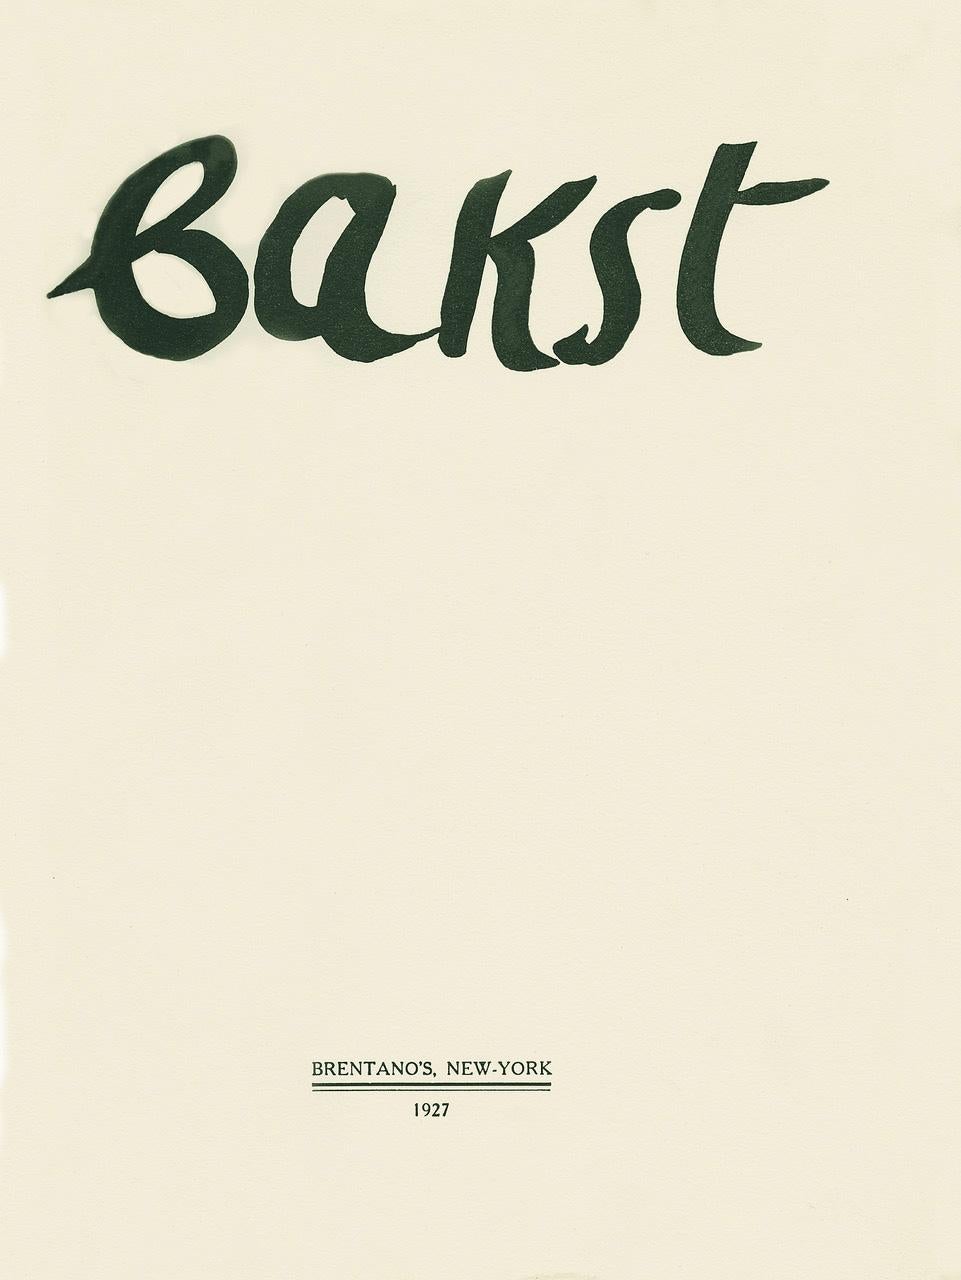 LEON BAKST, Inedited Works of Bakst; Essays on Bakst by Louis Reau, Denis Roche, V. Svietlov and A. Tessier. 
New York: Brentano's, 1927. 
FIRST, LIMITED EDITION
Folio, 12 3/8 x 9 3/4 inches (315 x 248 mm); pp. 127, [2]; THIS IS NO. 59 of 600